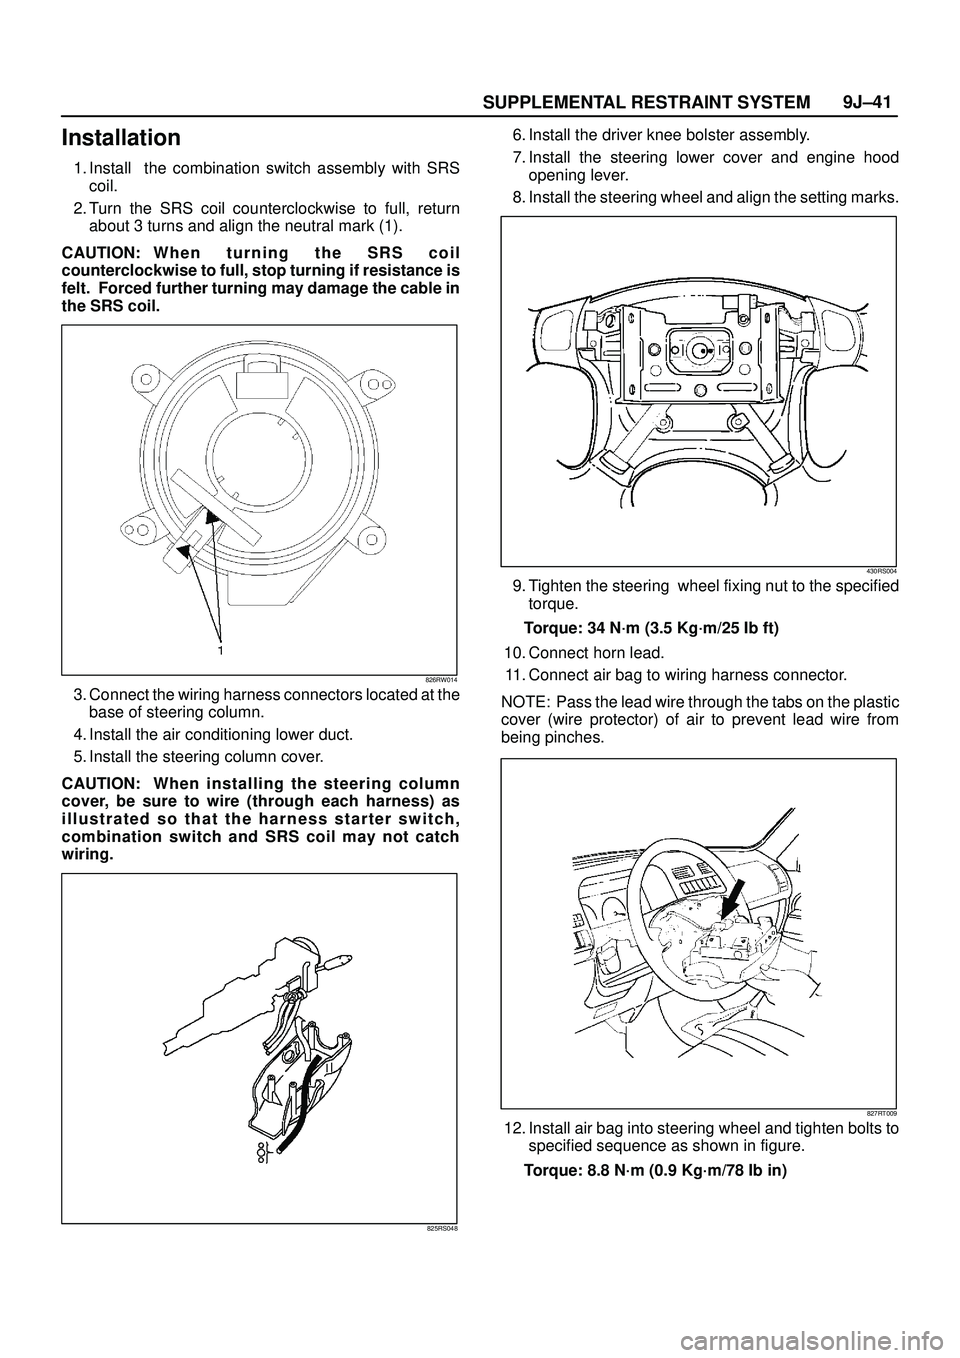 ISUZU TROOPER 1998  Service Repair Manual SUPPLEMENTAL RESTRAINT SYSTEM9J±41
Installation
1. Install  the combination switch assembly with SRS
coil.
2. Turn the SRS coil counterclockwise to full, return
about 3 turns and align the neutral ma